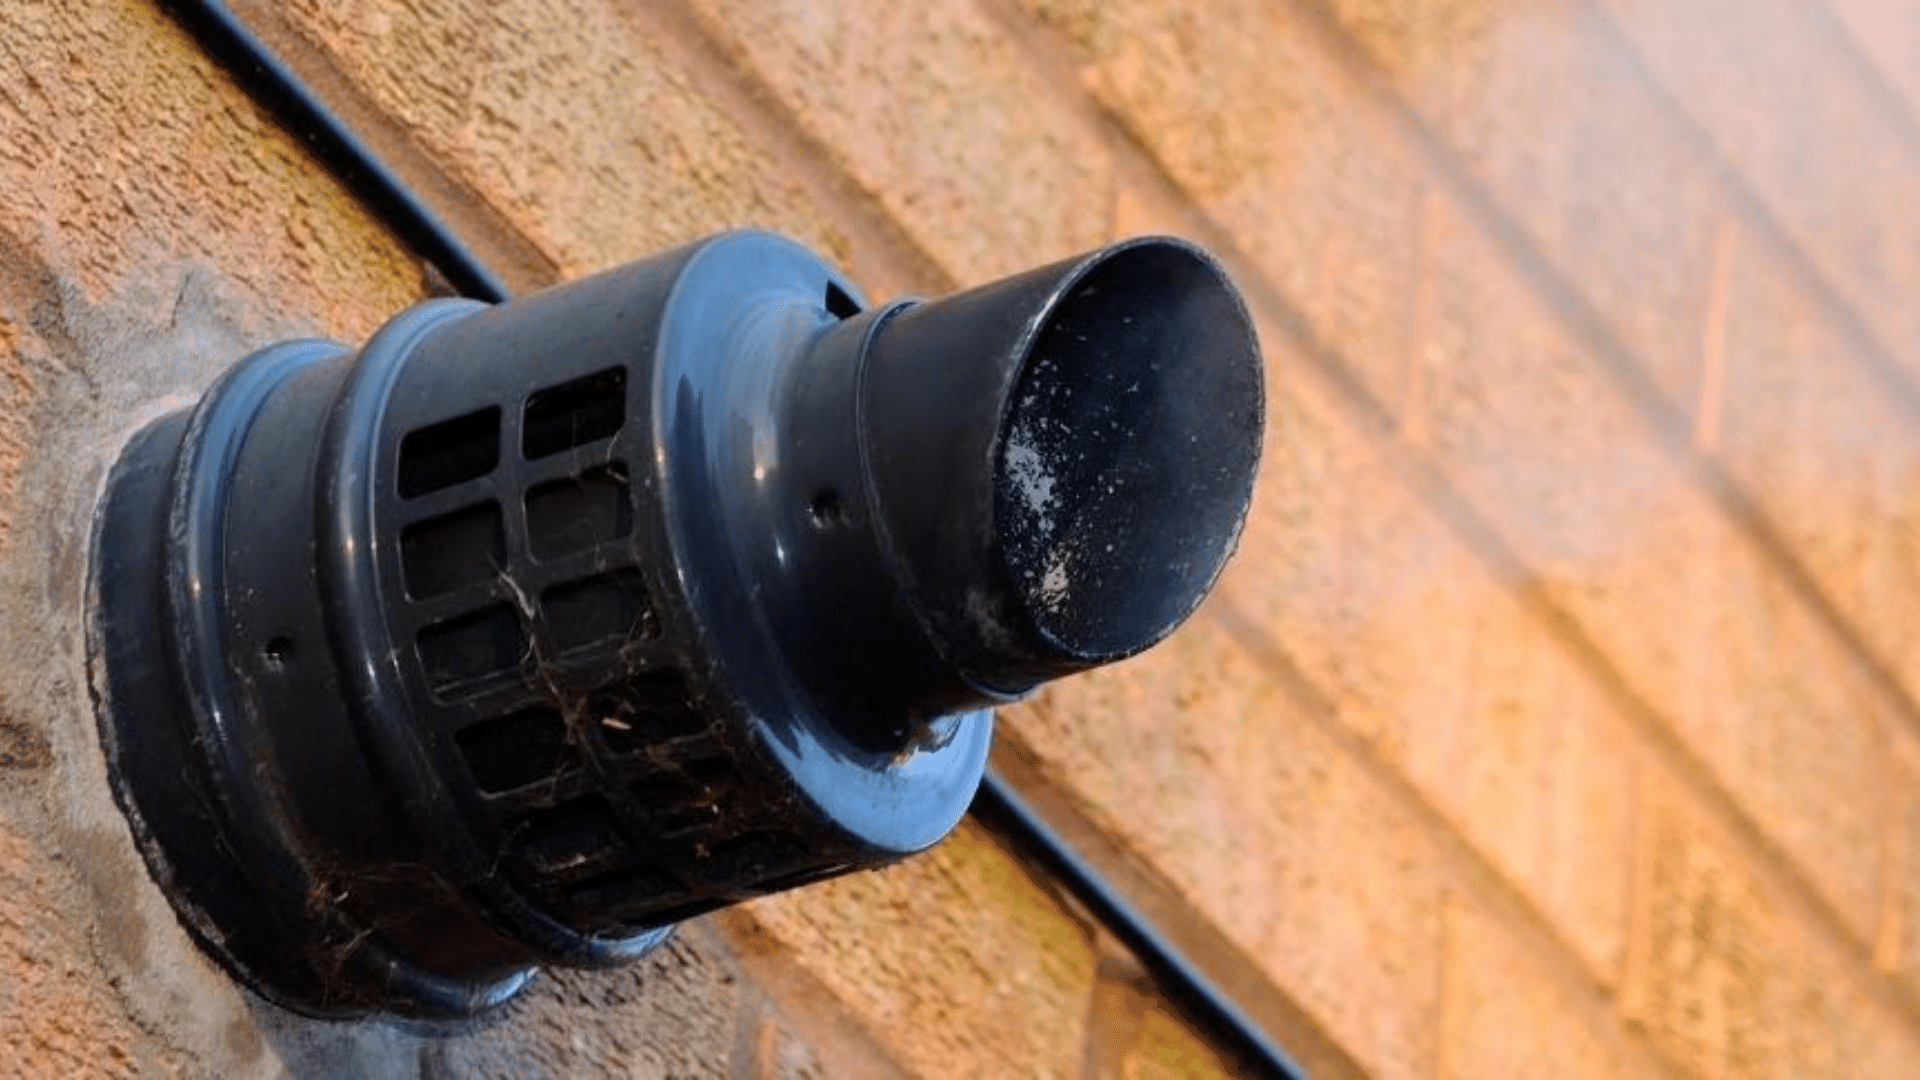 Issues with the flue